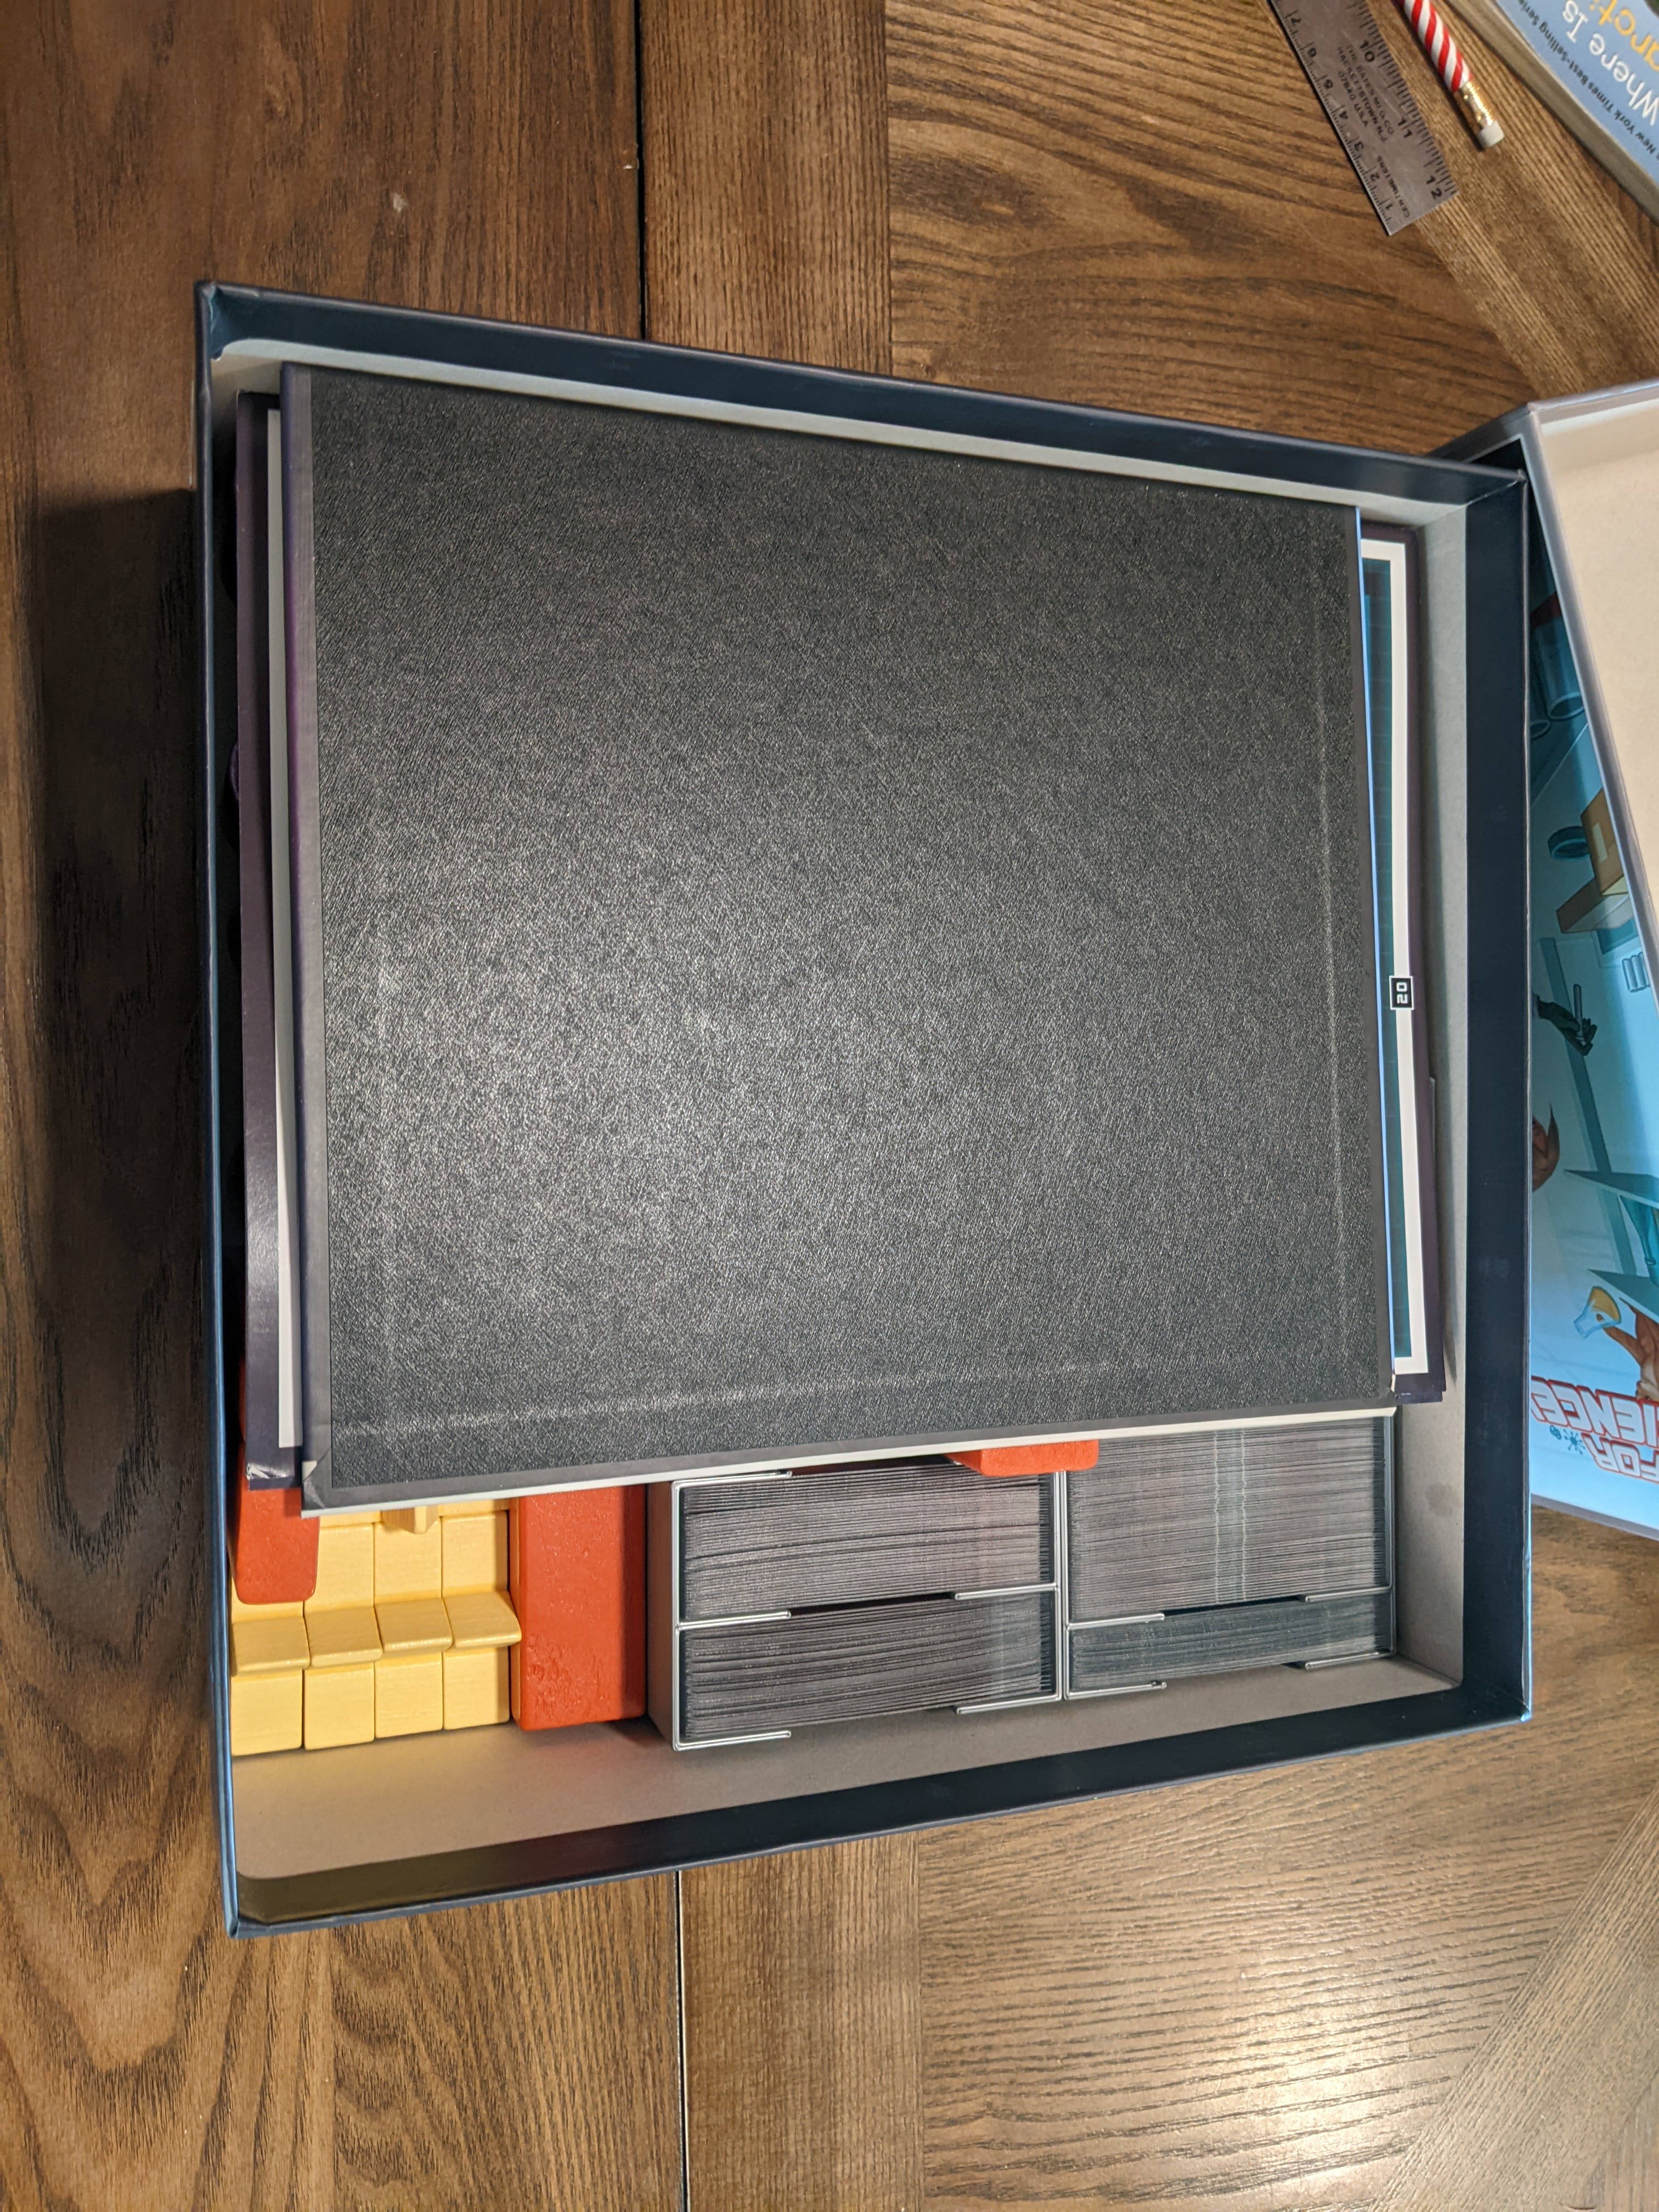 For Science board game box insert/organizer - sleeved cards